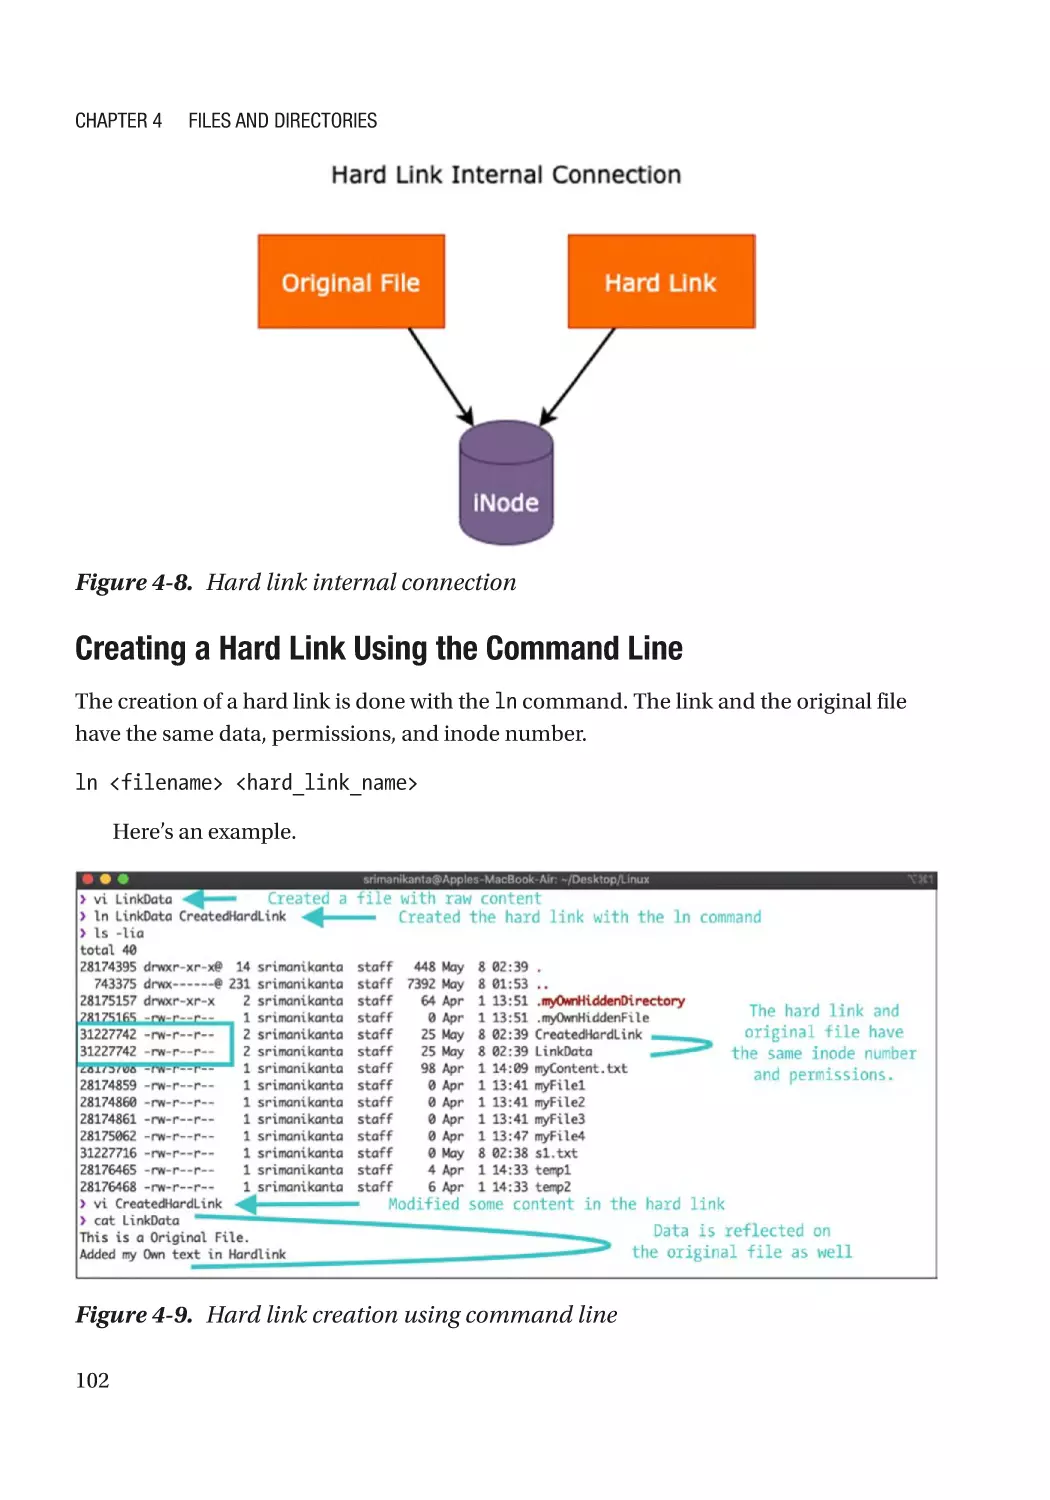 Creating a Hard Link Using the Command Line